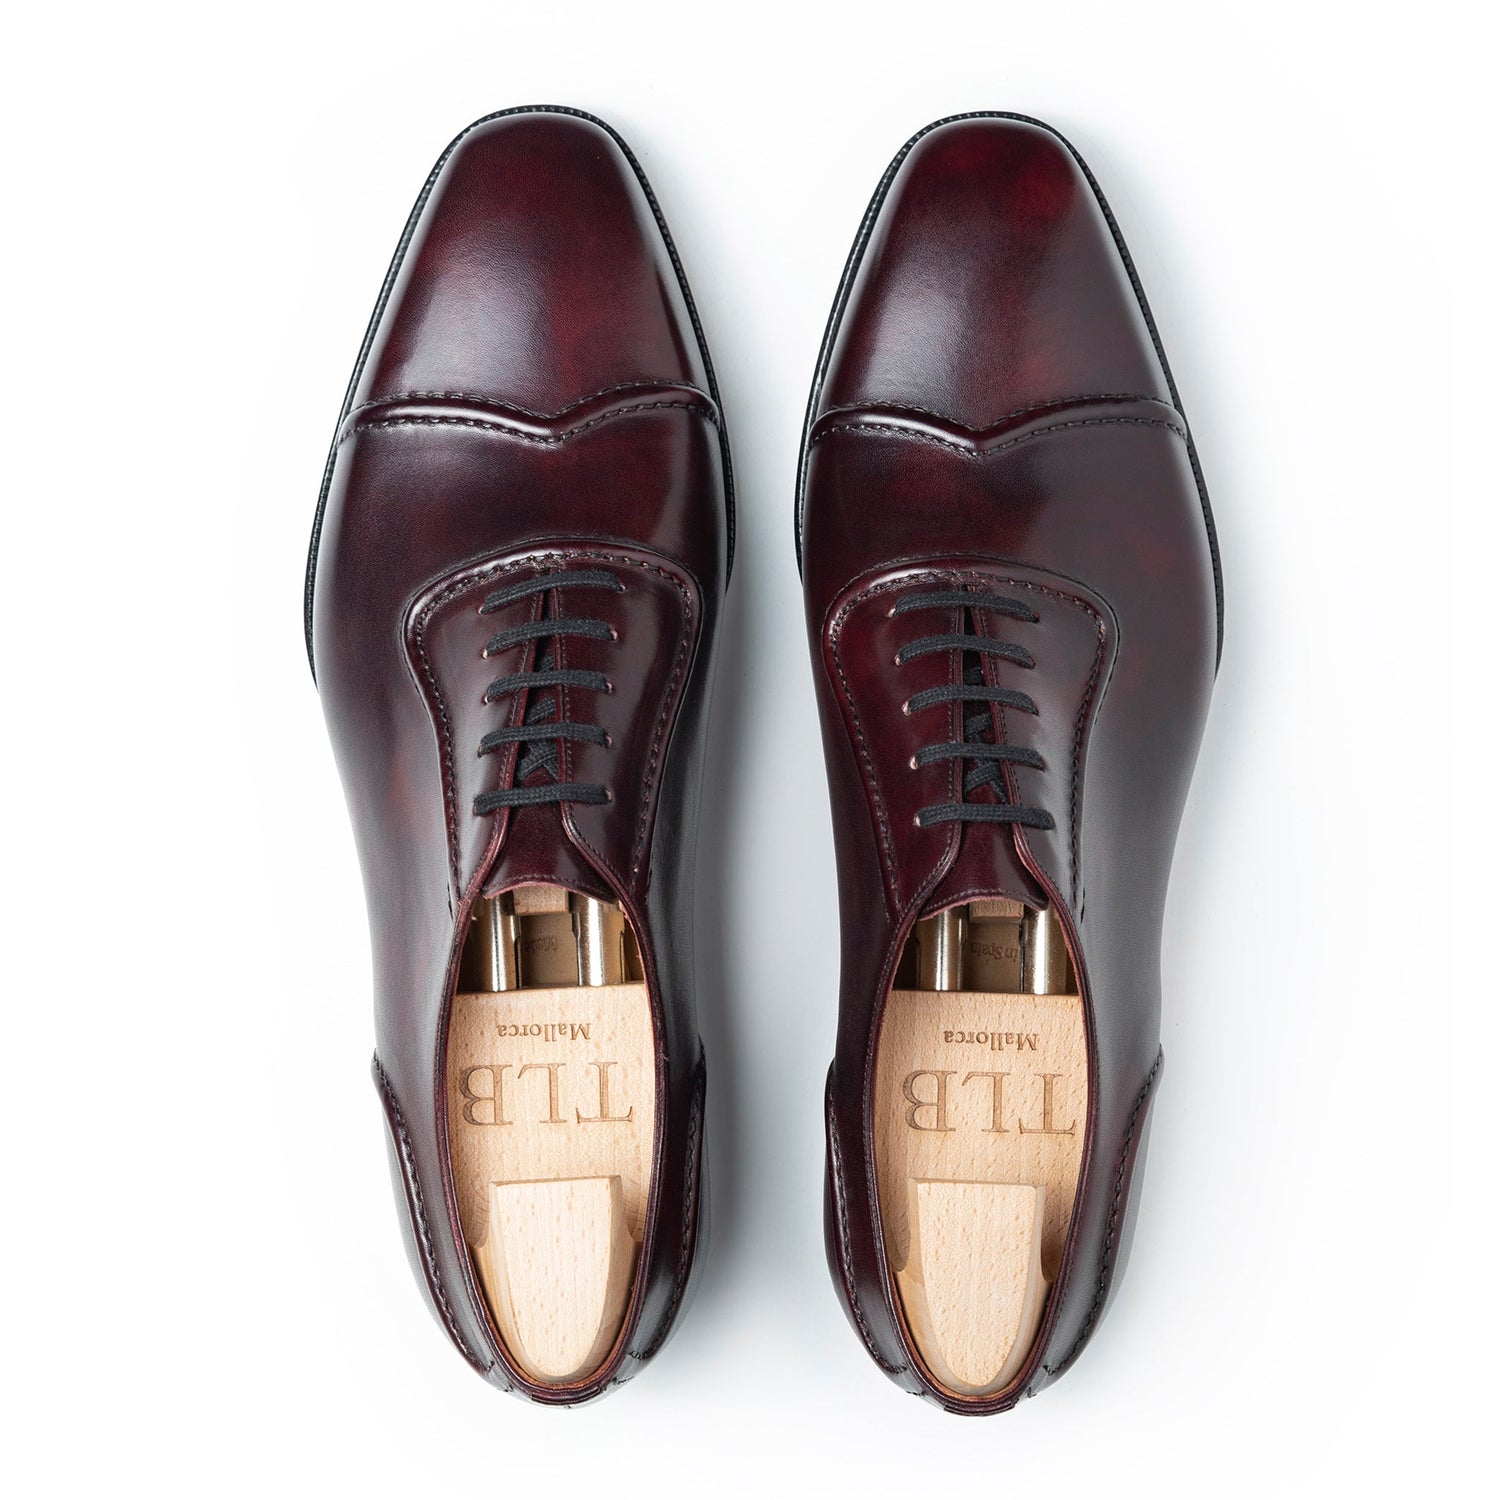 TLB Mallorca leather shoes - Men's oxford shoes 